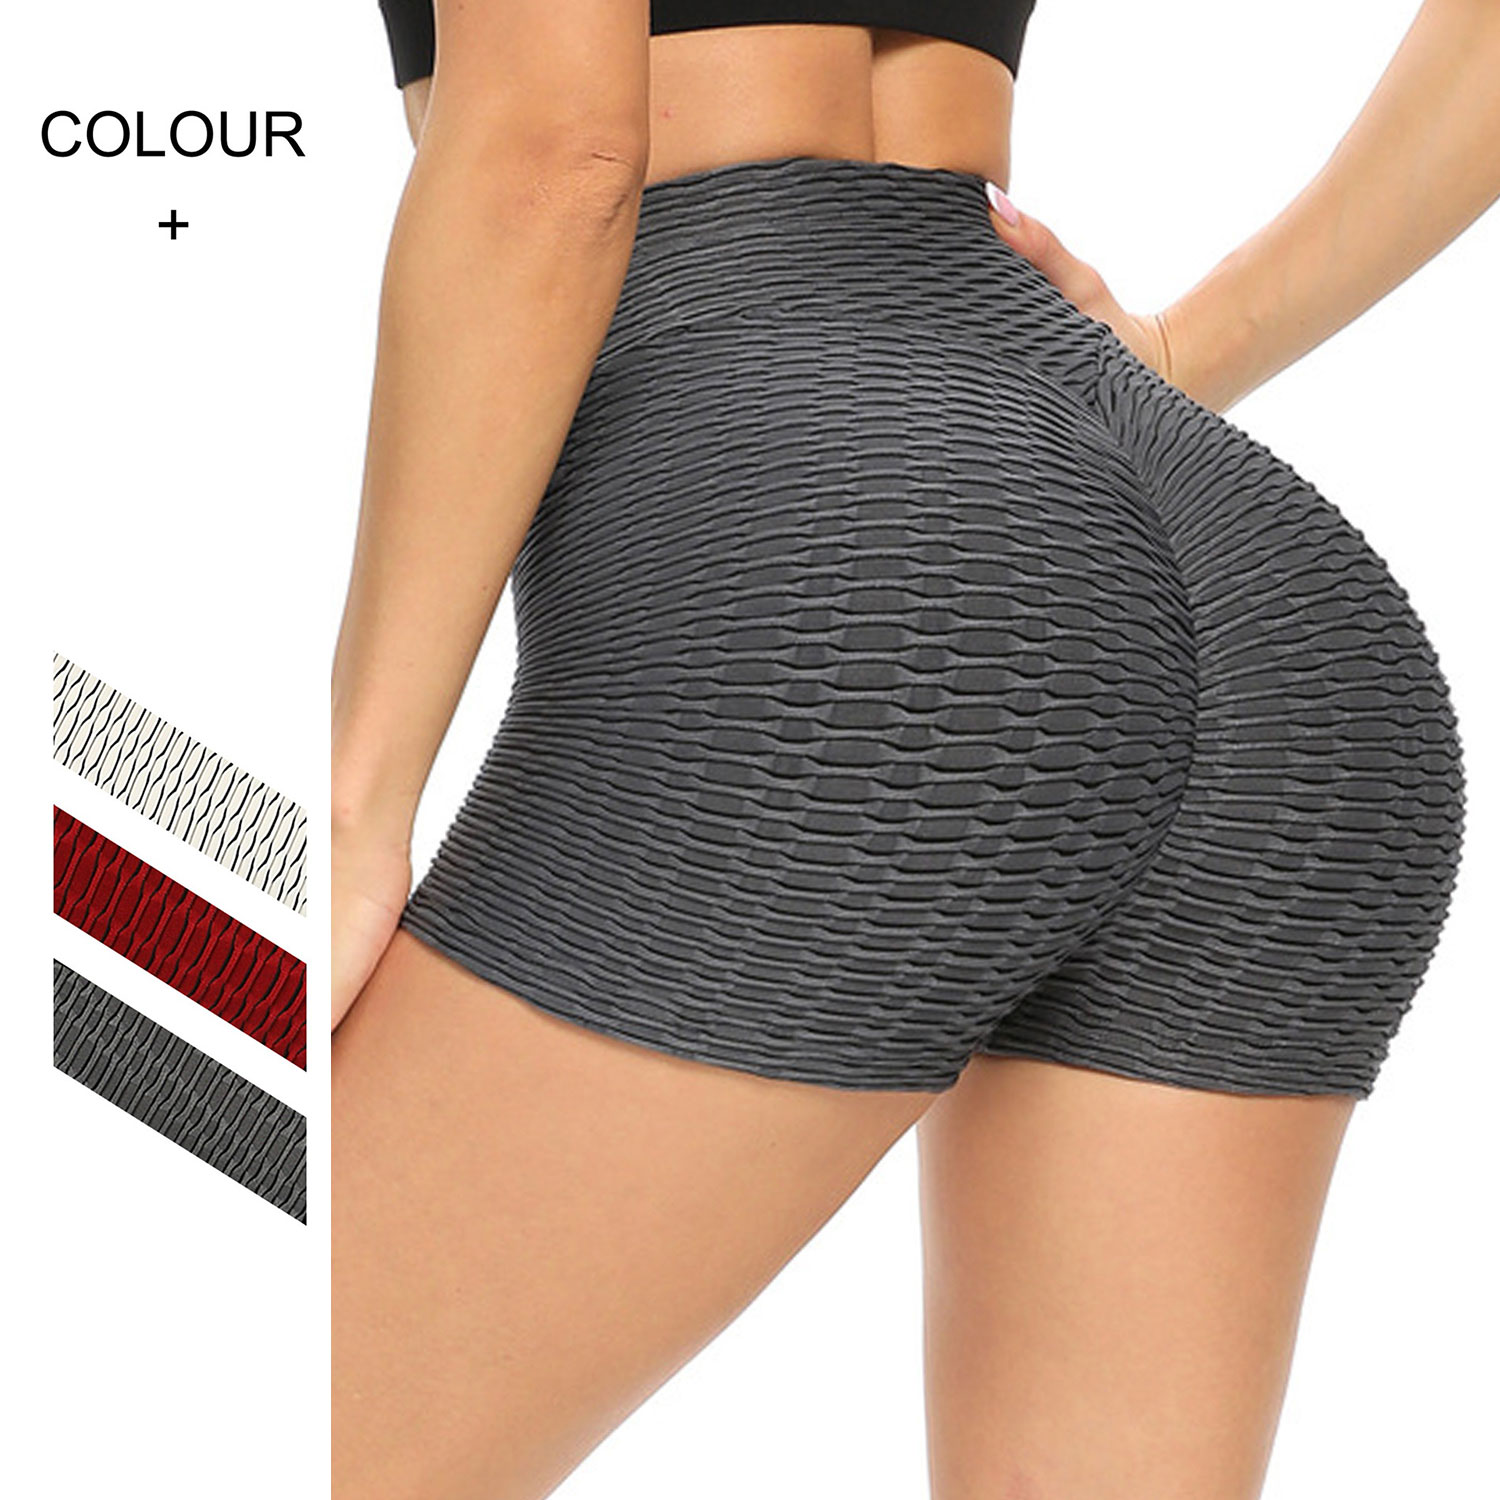 https://d3thqe68ymbqps.cloudfront.net/739876-large_default/fittoo-women-high-waist-shorts-for-fitness-sports-female-short-legging.jpg